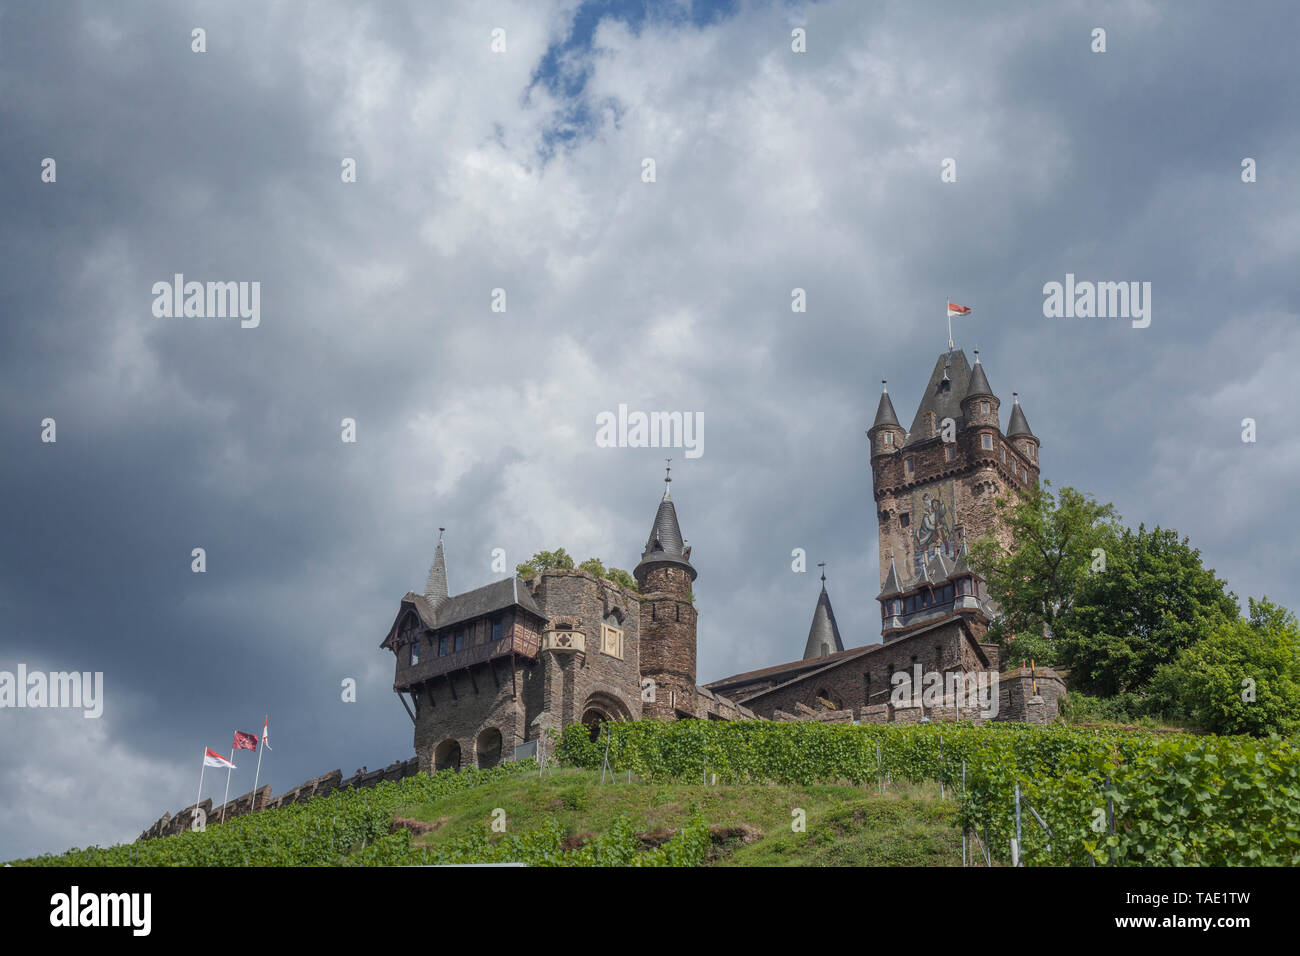 Reichsburg Cochem, dramatically clouded sky, Cochem on the Mosel, Moselle, Rhineland-Palatinate, Germany, Europe I Reichsburg Cochem, dramatisch bewöl Stock Photo